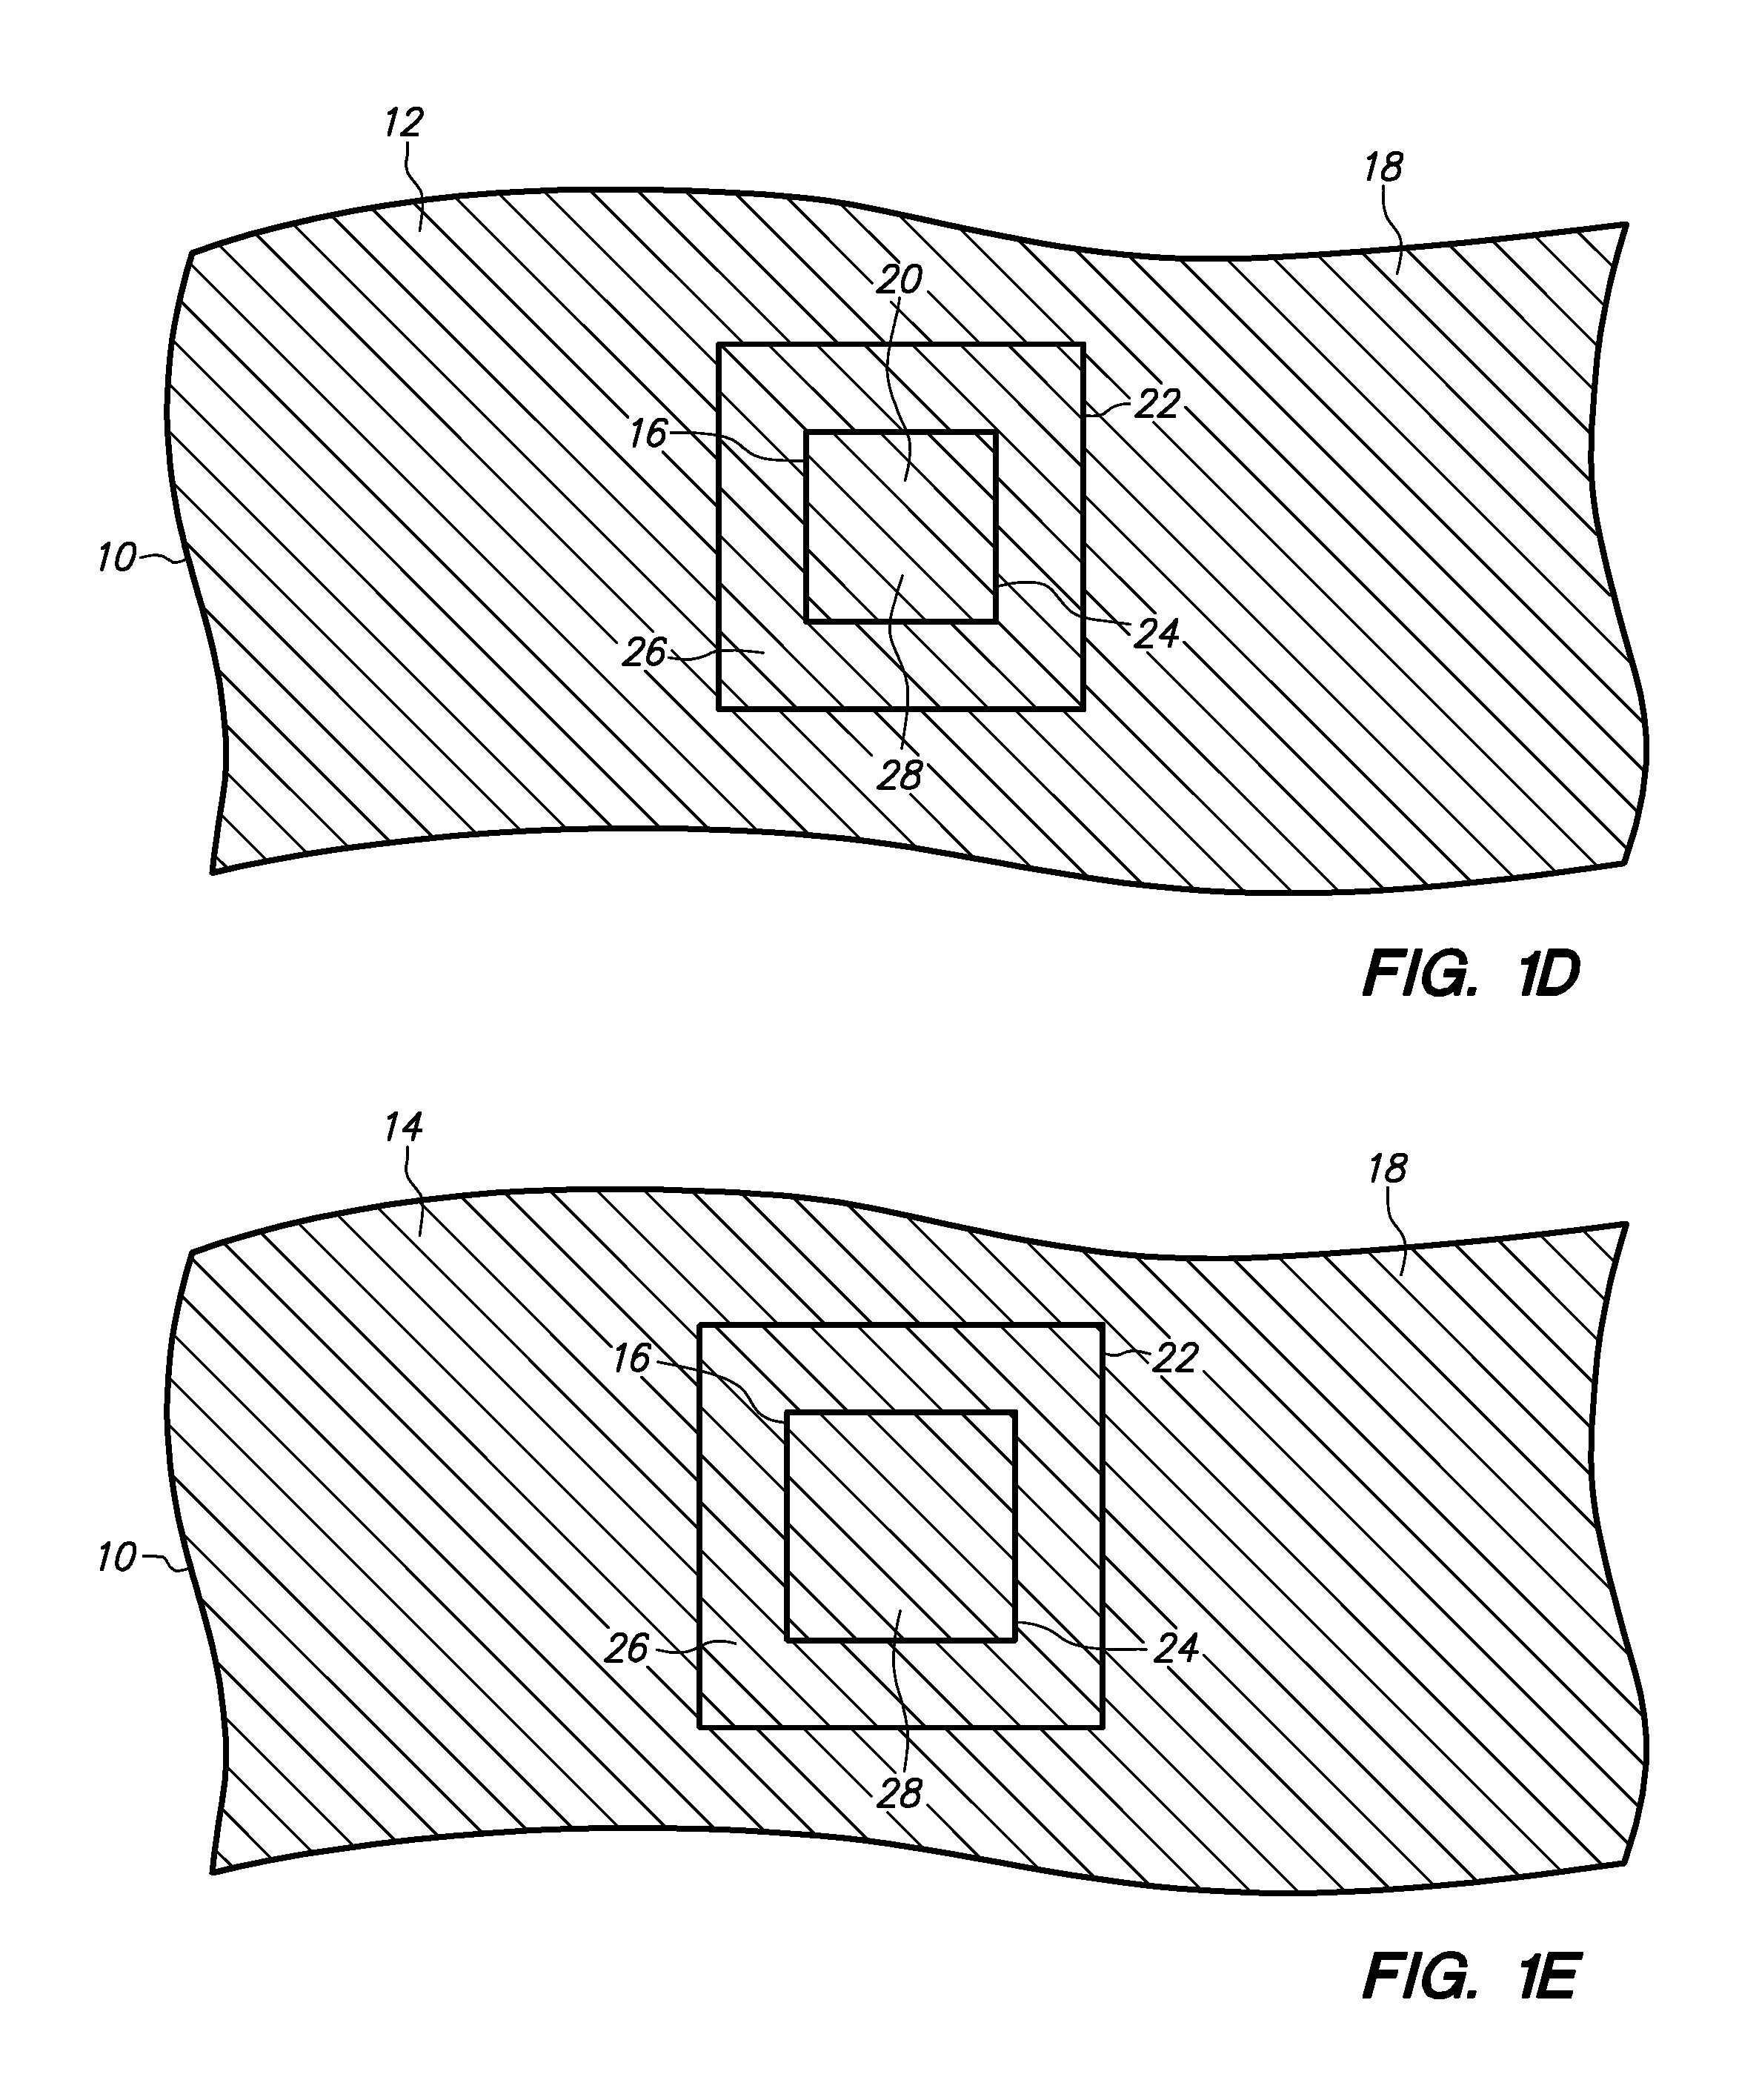 Method of making a semiconductor chip assembly with a bump/base/ledge heat spreader, dual adhesives and a cavity in the bump